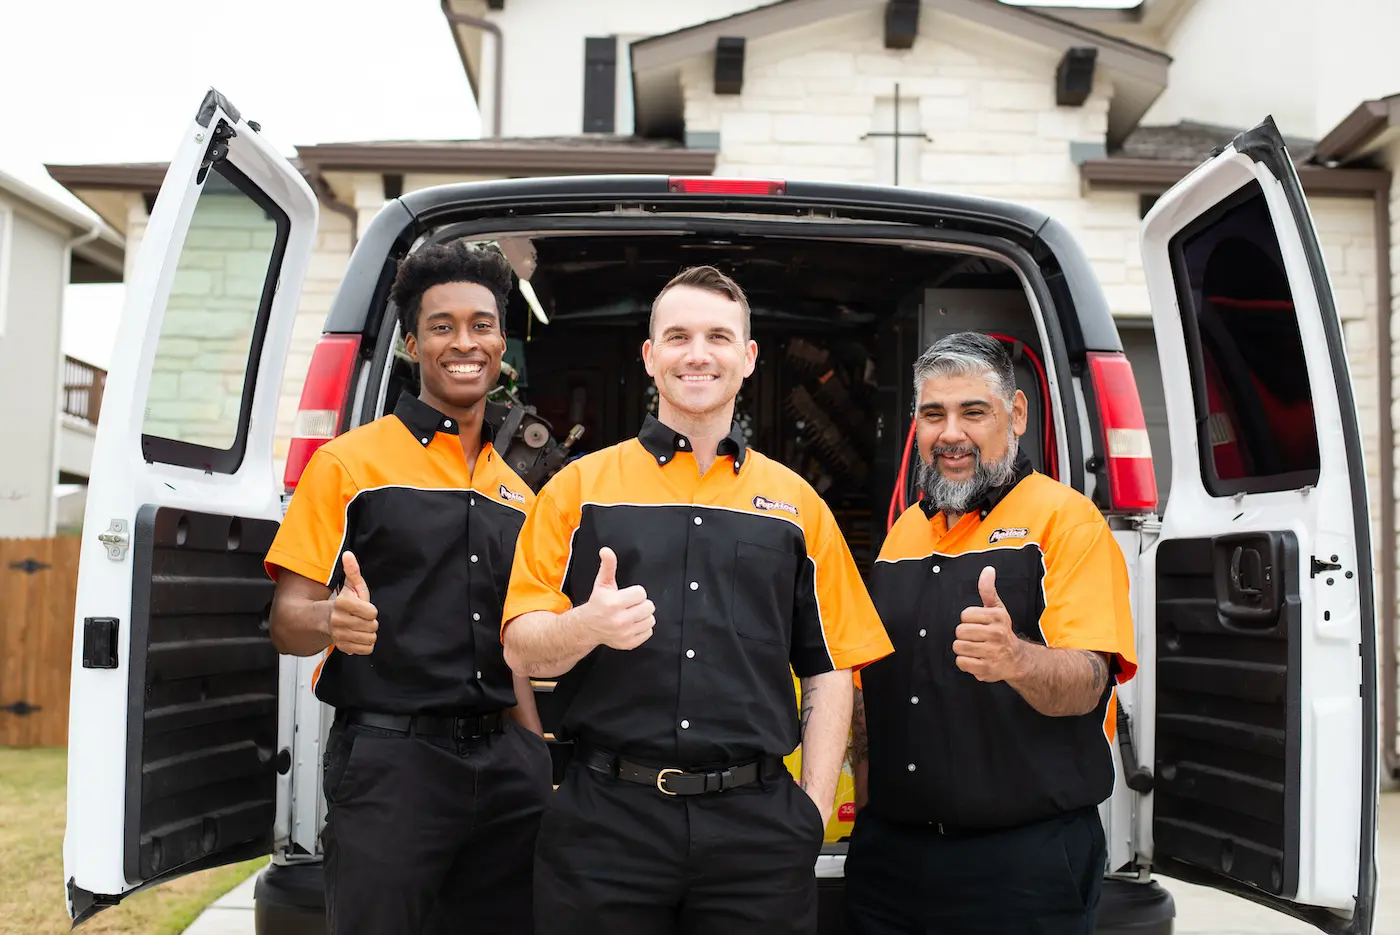 Three locksmith technicians from Pop-A-Lock Metairie standing next to their van holding thumbs up.